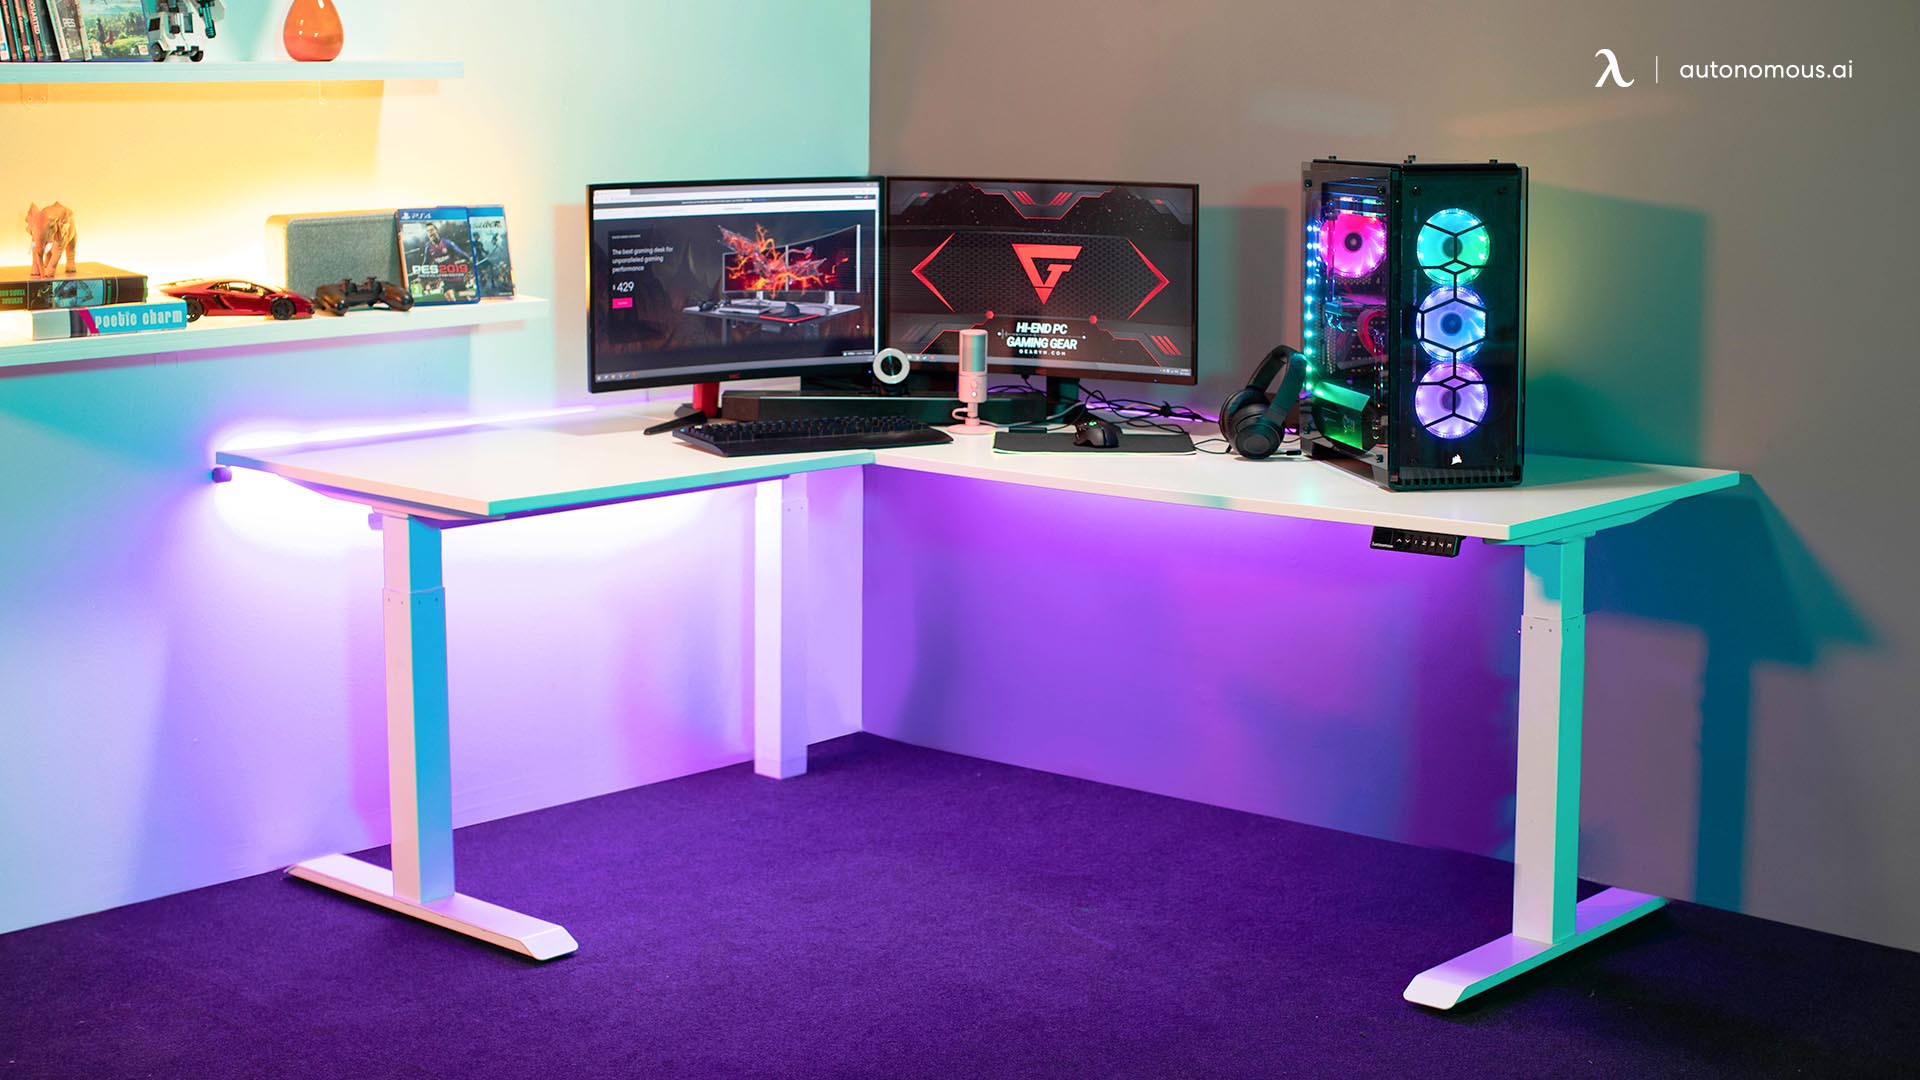 Power in his and hers gaming setup